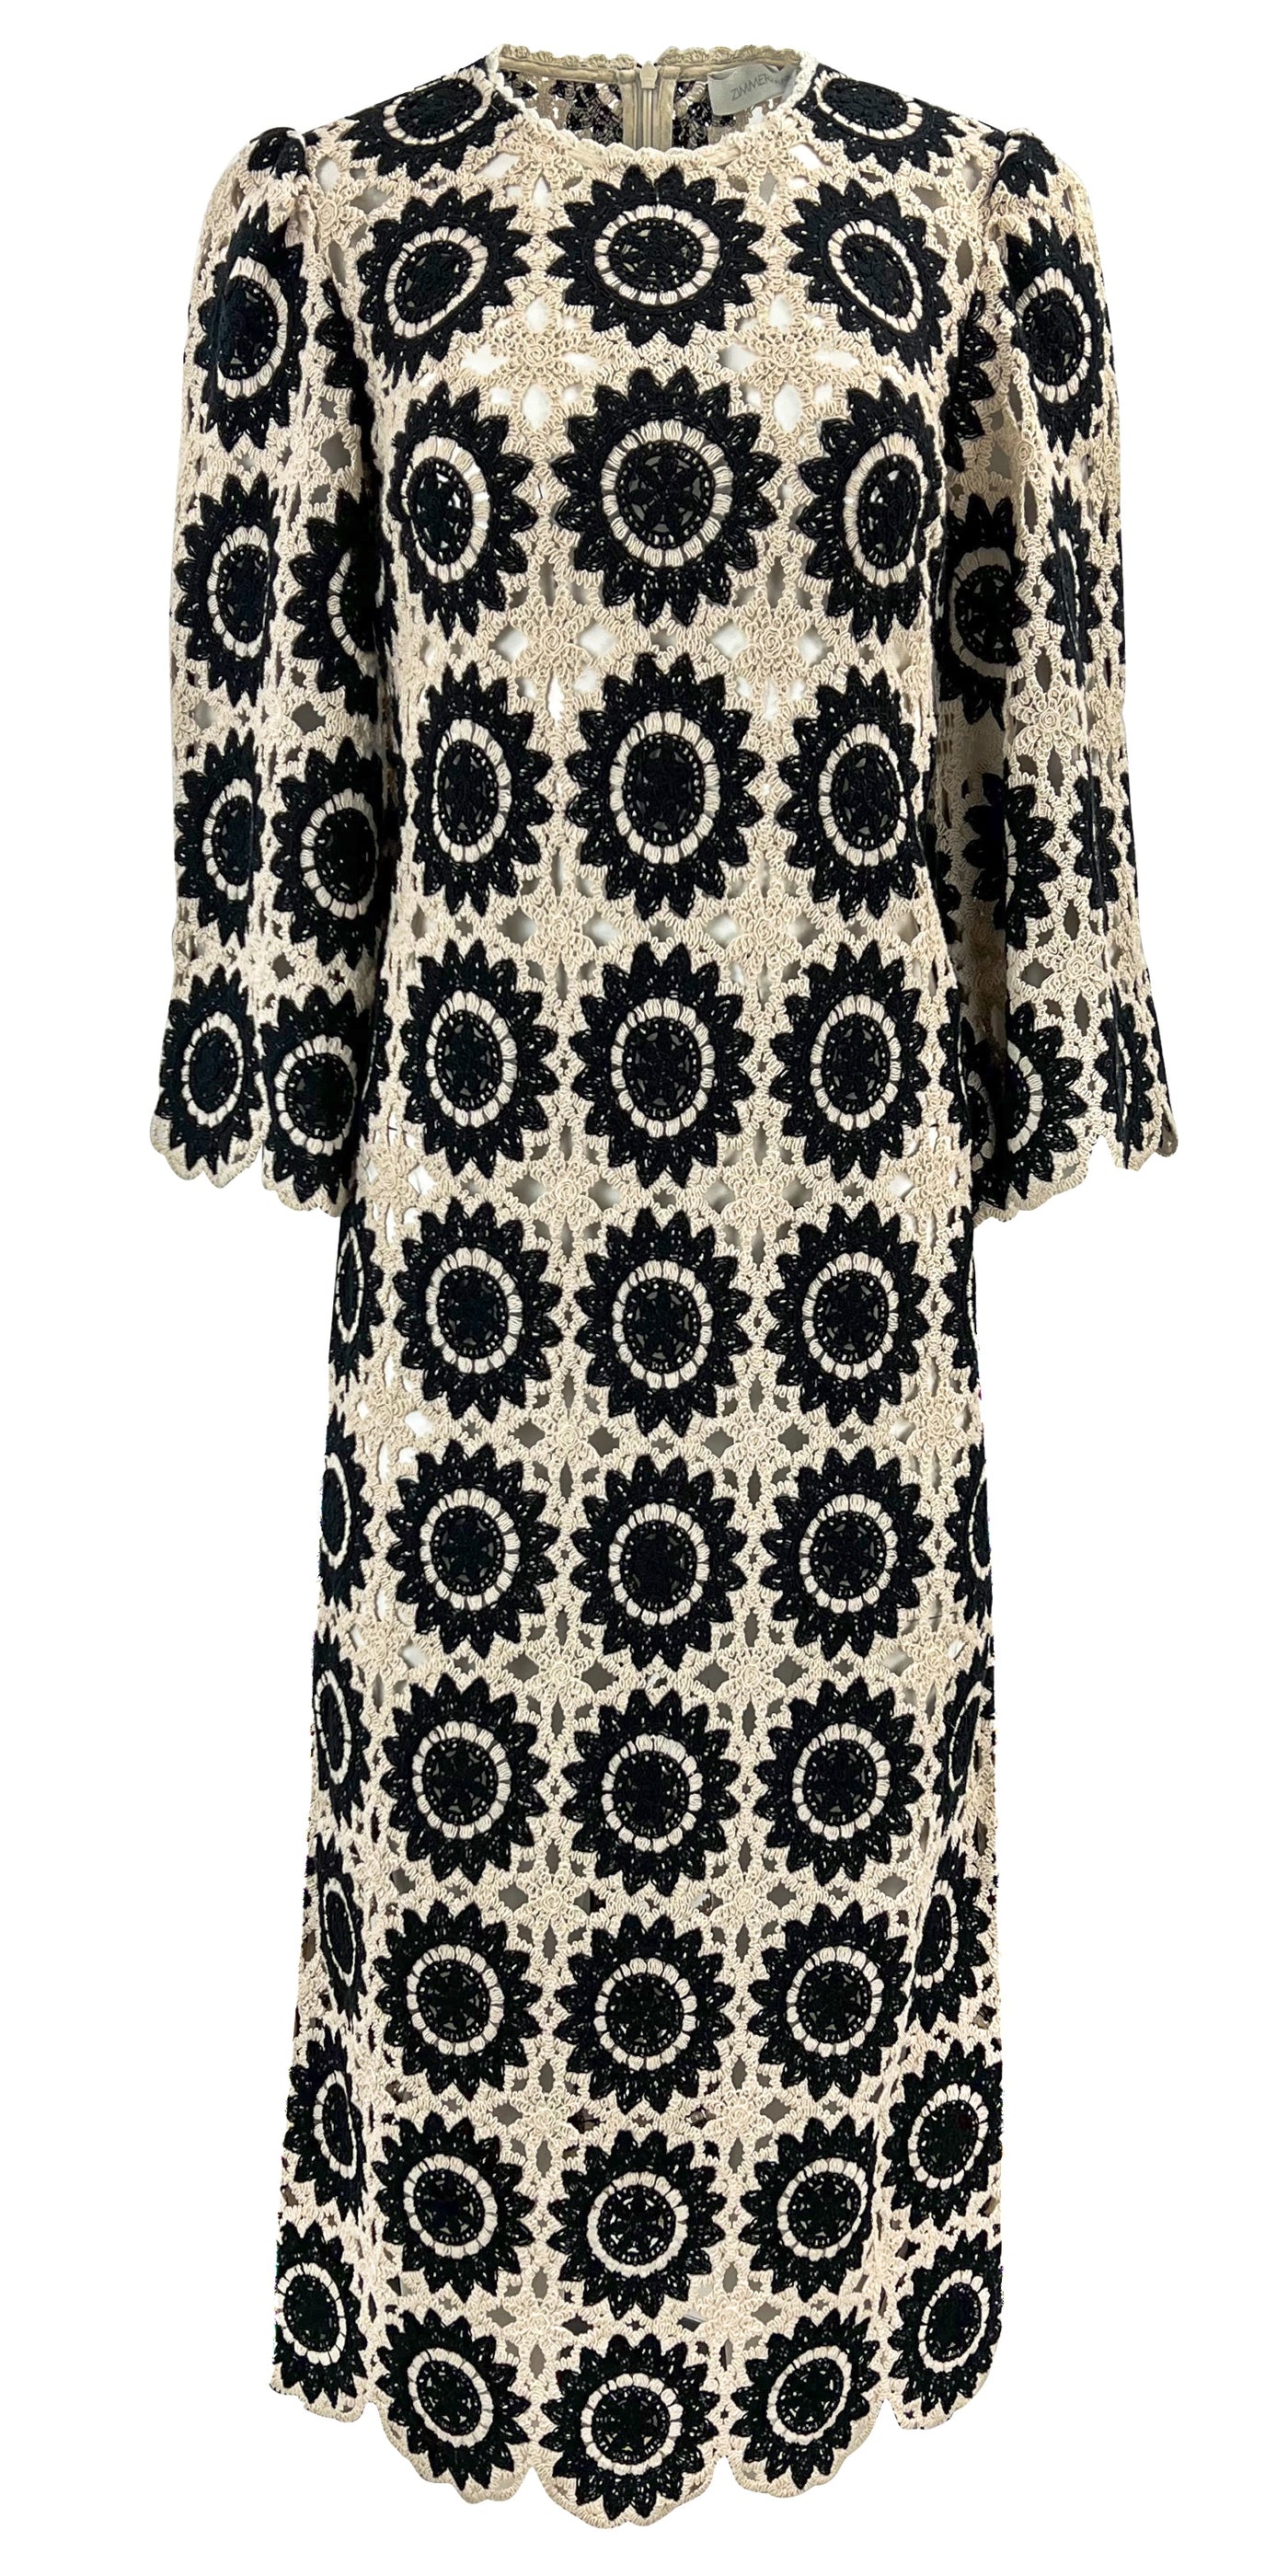 Zimmermann Ginger Lace Midi Dress in Cream/Black - Discounts on Zimmermann at UAL